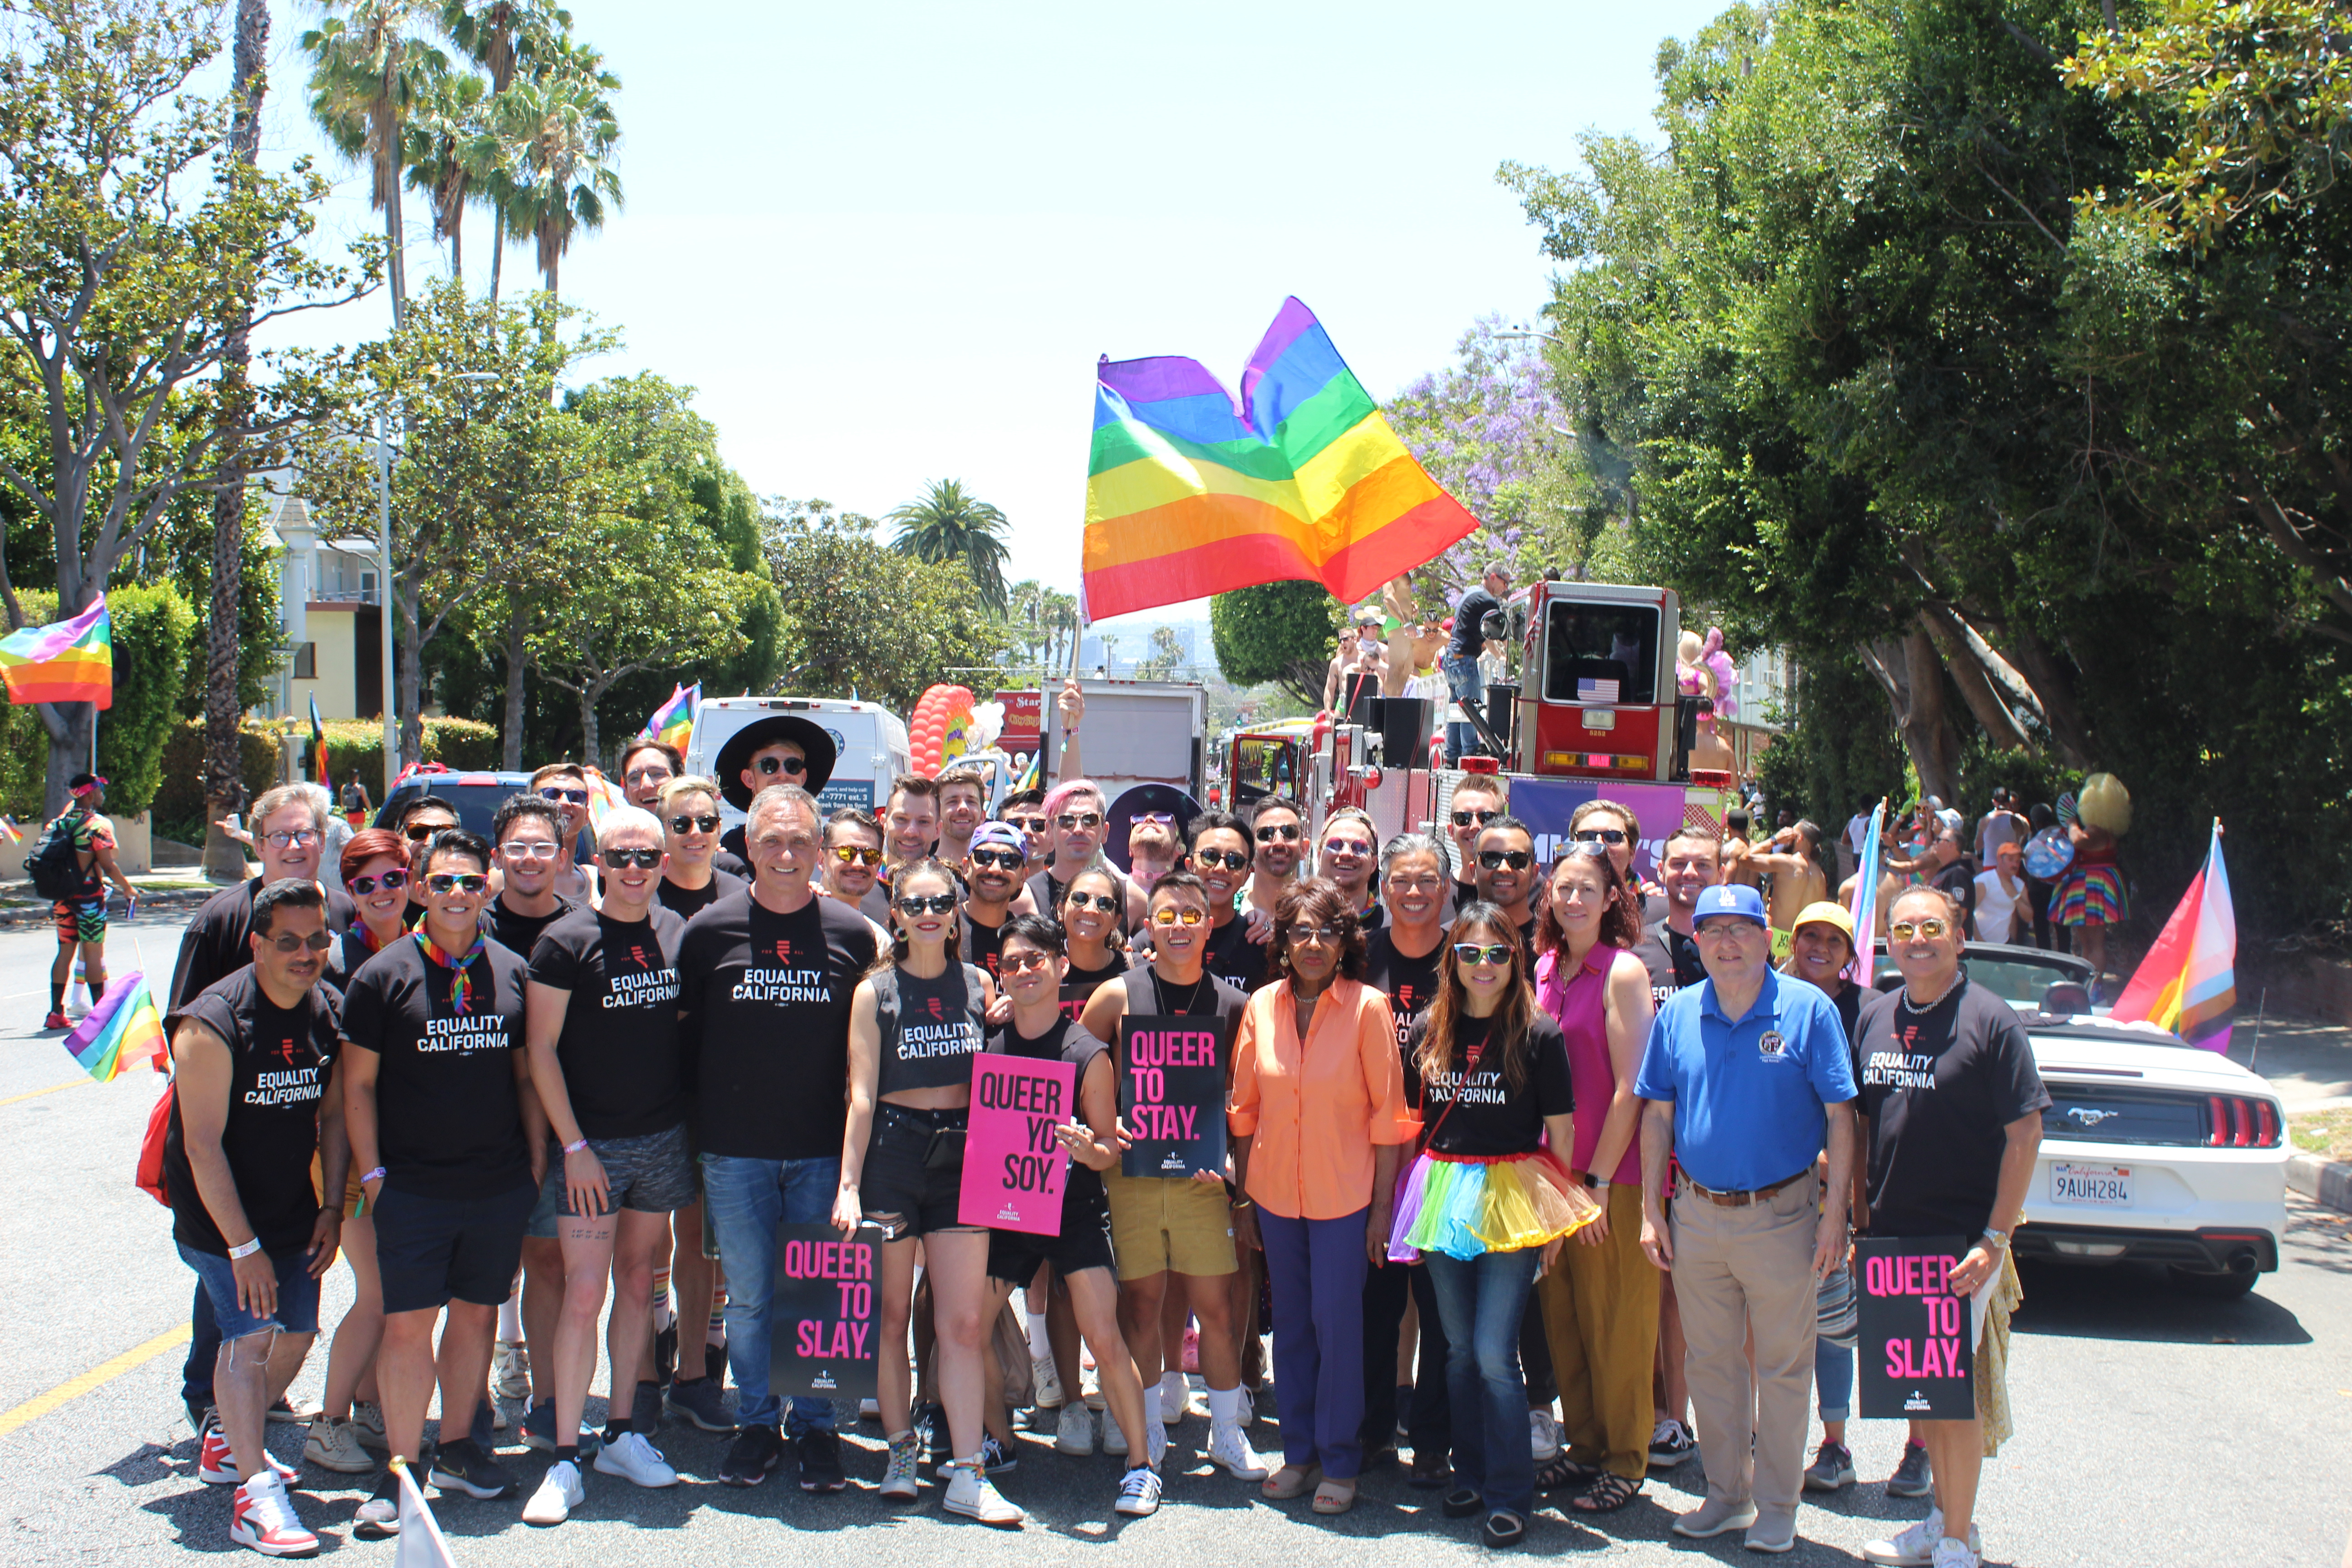 A group of people stand together holding a rainbow flag high, smiling at the camera.